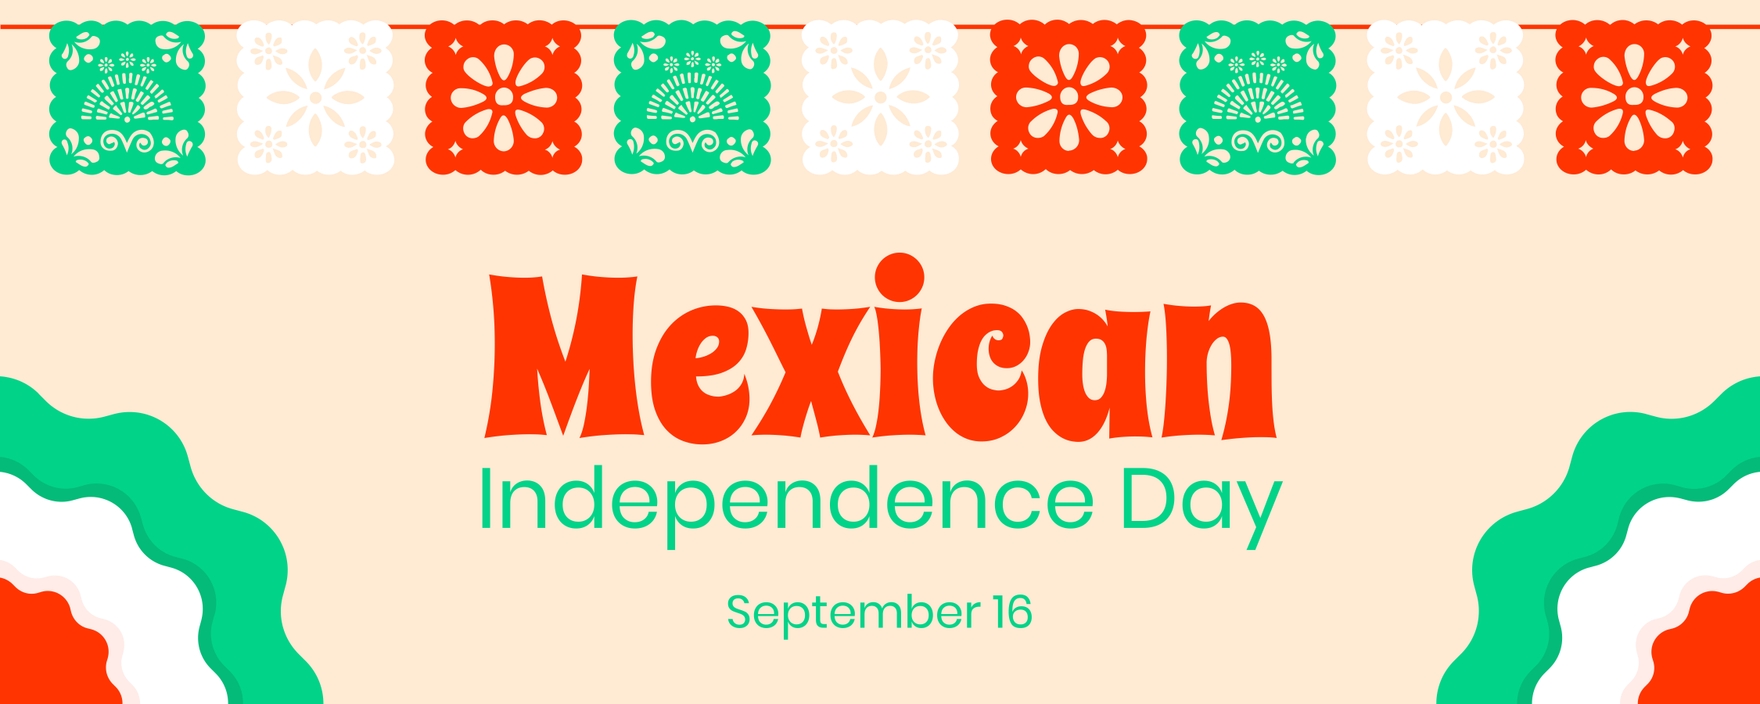 Mexican Independence Day Flex Banner